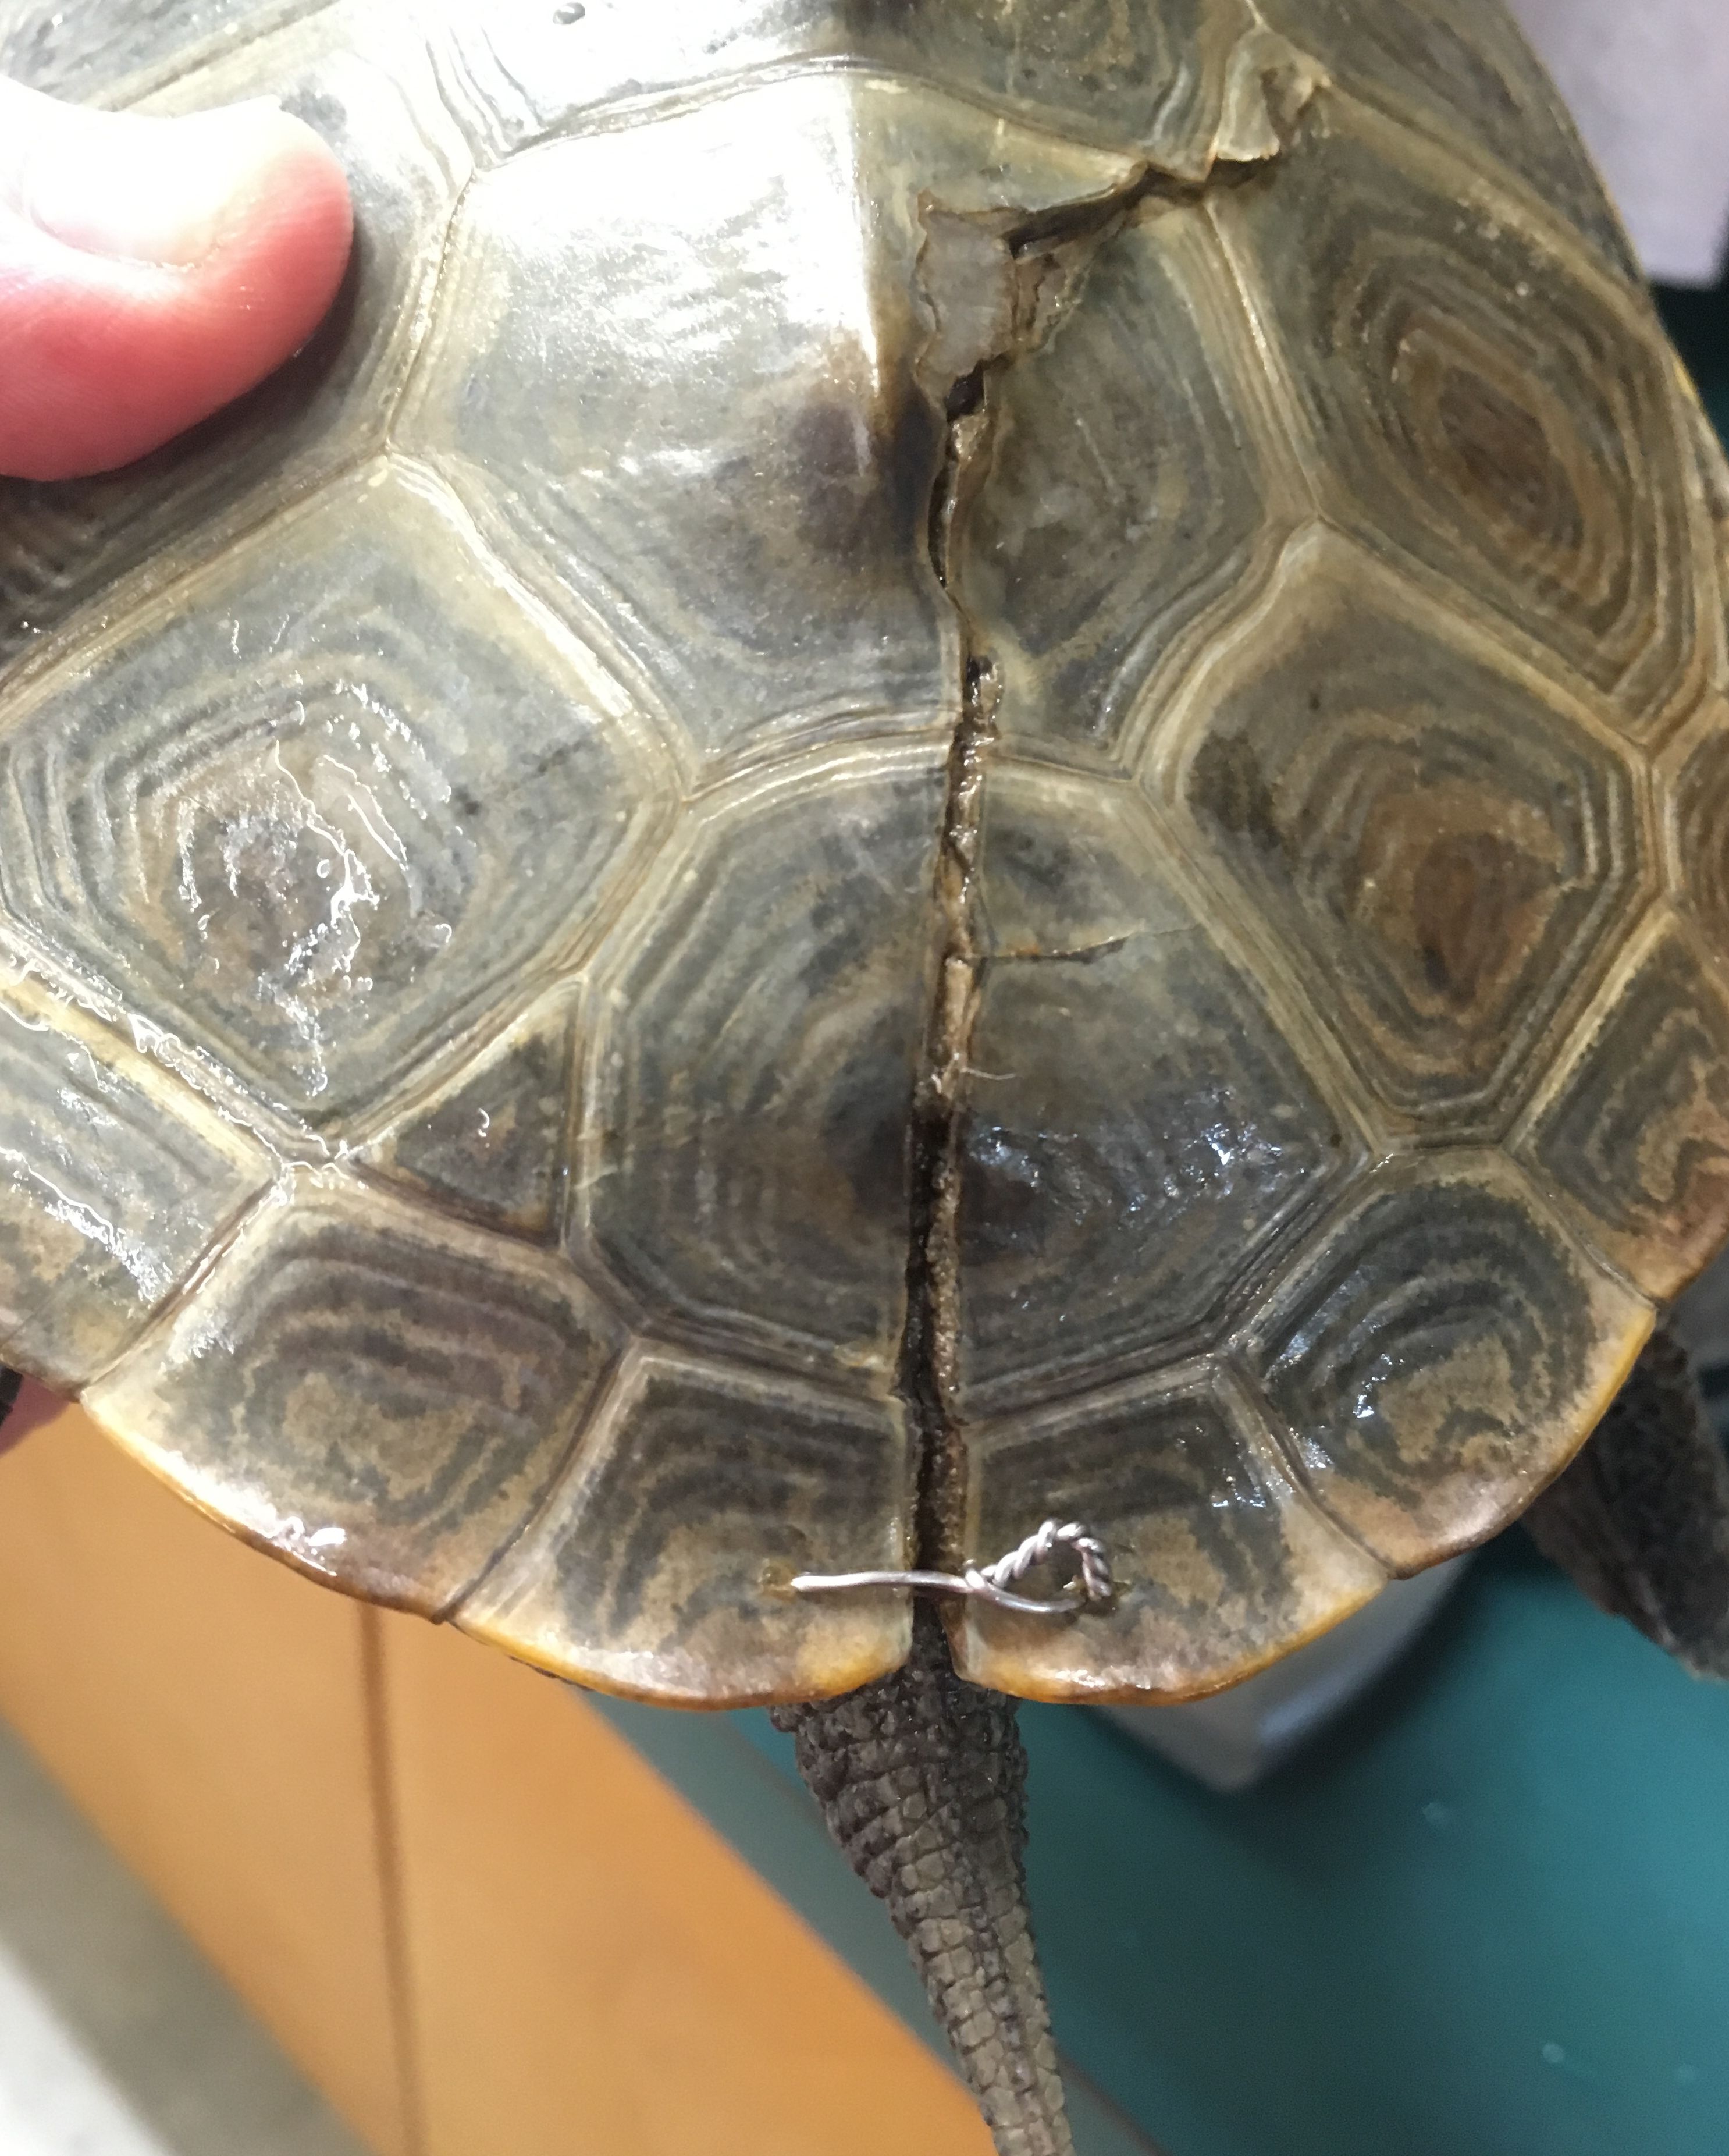 The suture pin will allow the split carapace to heal on its own.